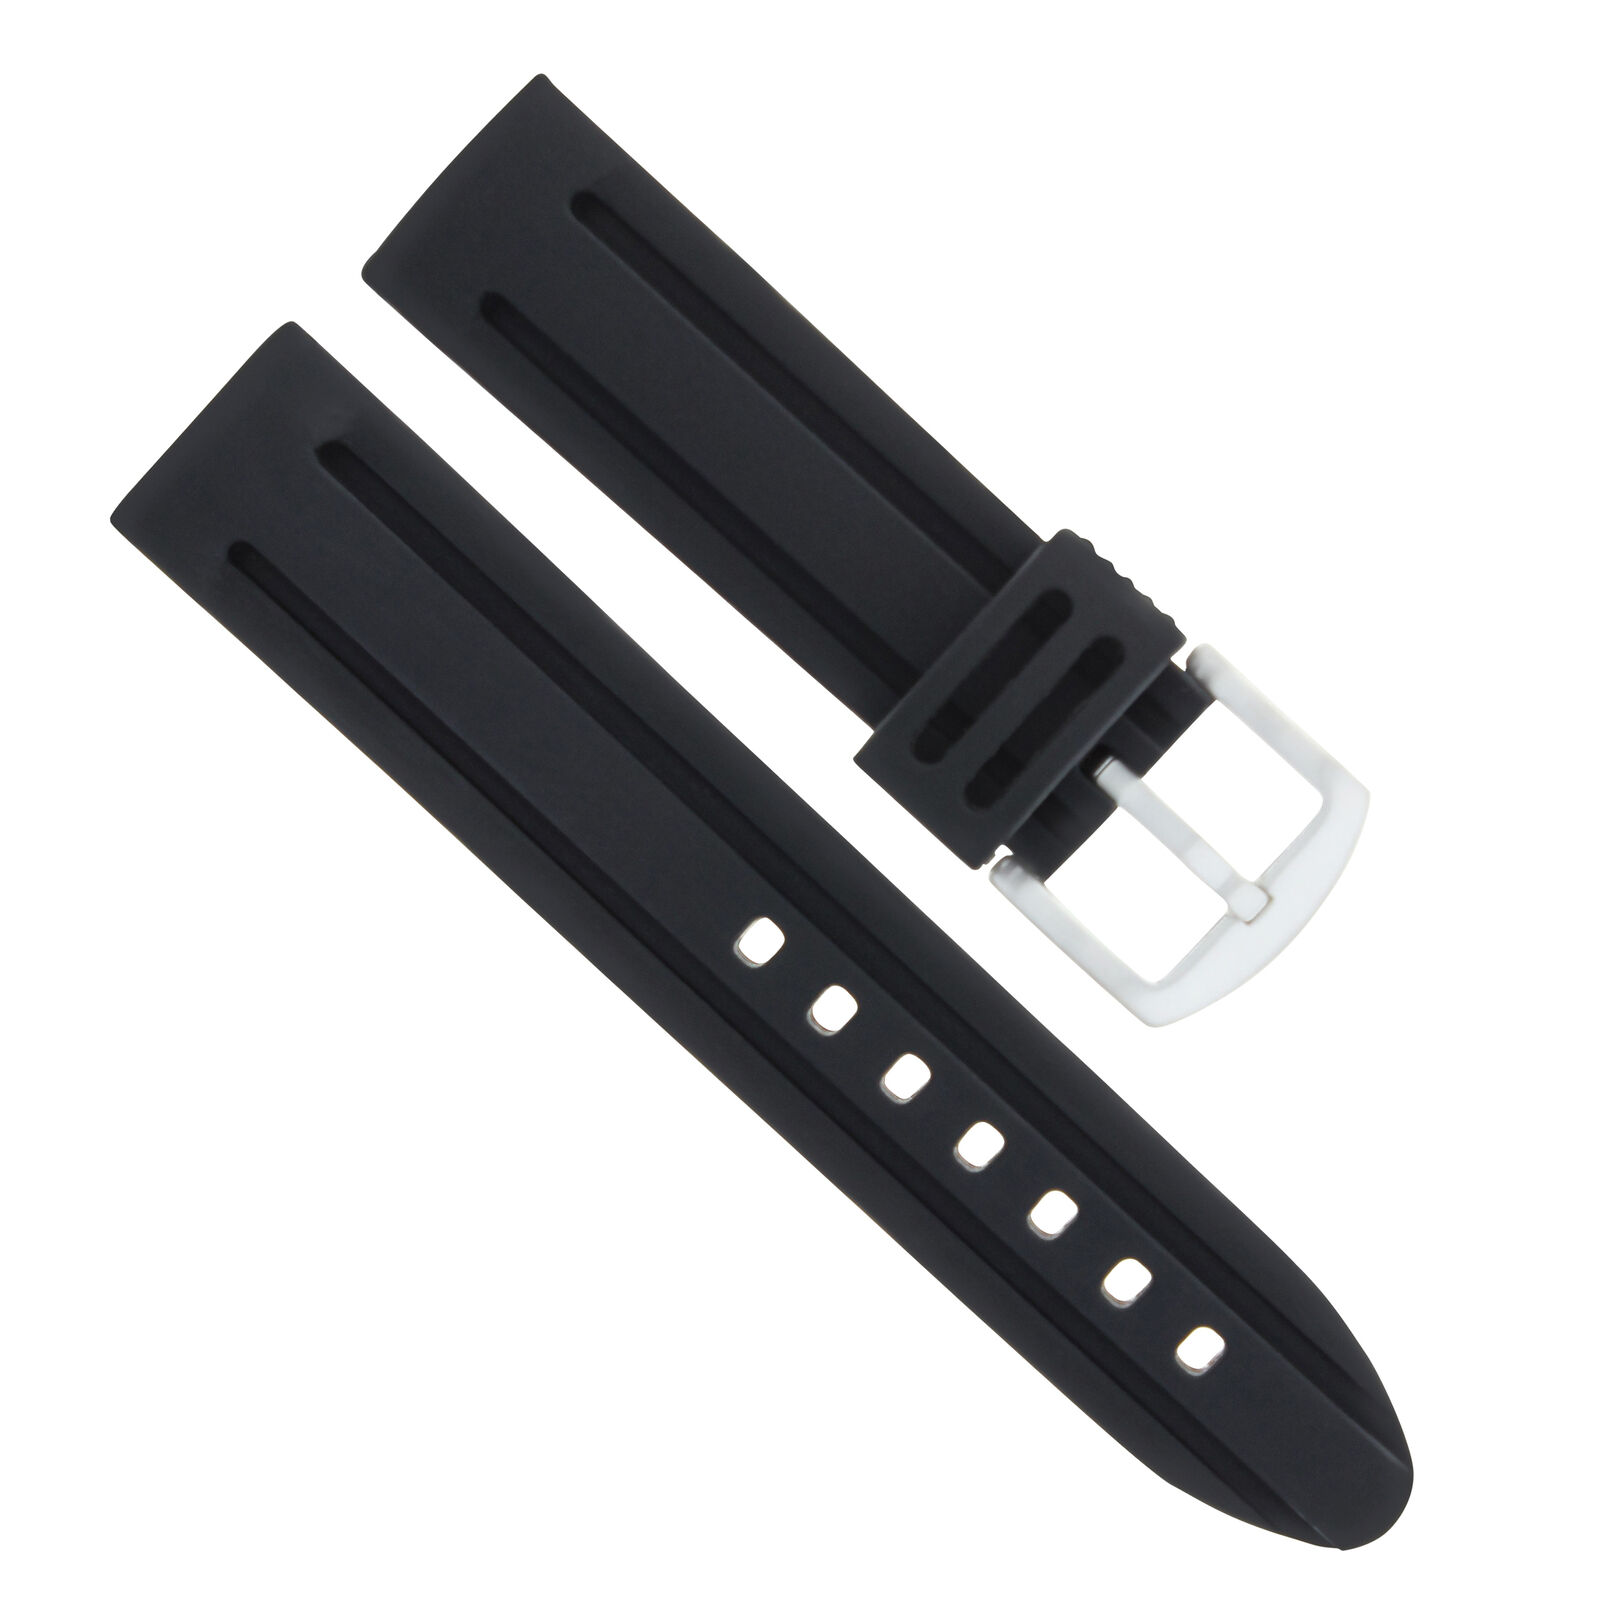 PAM 22MM SILICONE RUBBER WATCH STRAP BAND FOR PANERAI 40MM GMT WATCH BLACK